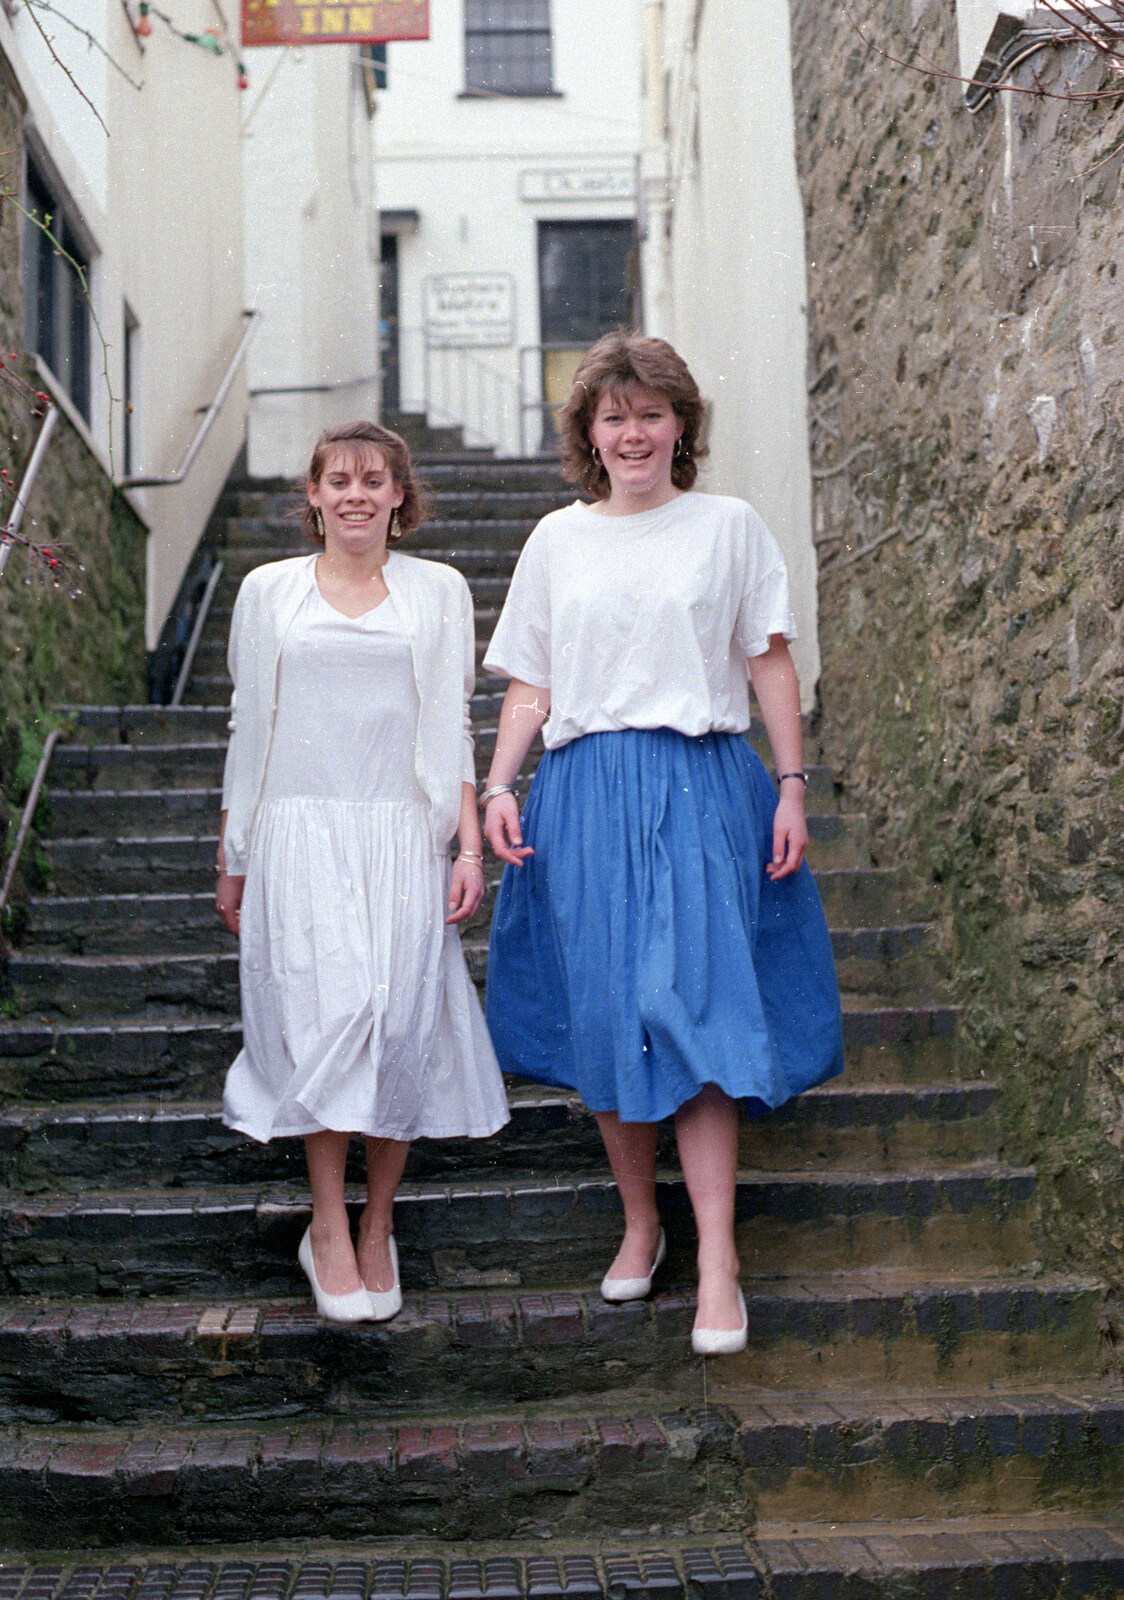 Michelle and Ruth stroll down the steps from Uni: The Plymouth Polytechnic Satique Project, Salcombe and Plymouth - 10th May 1986